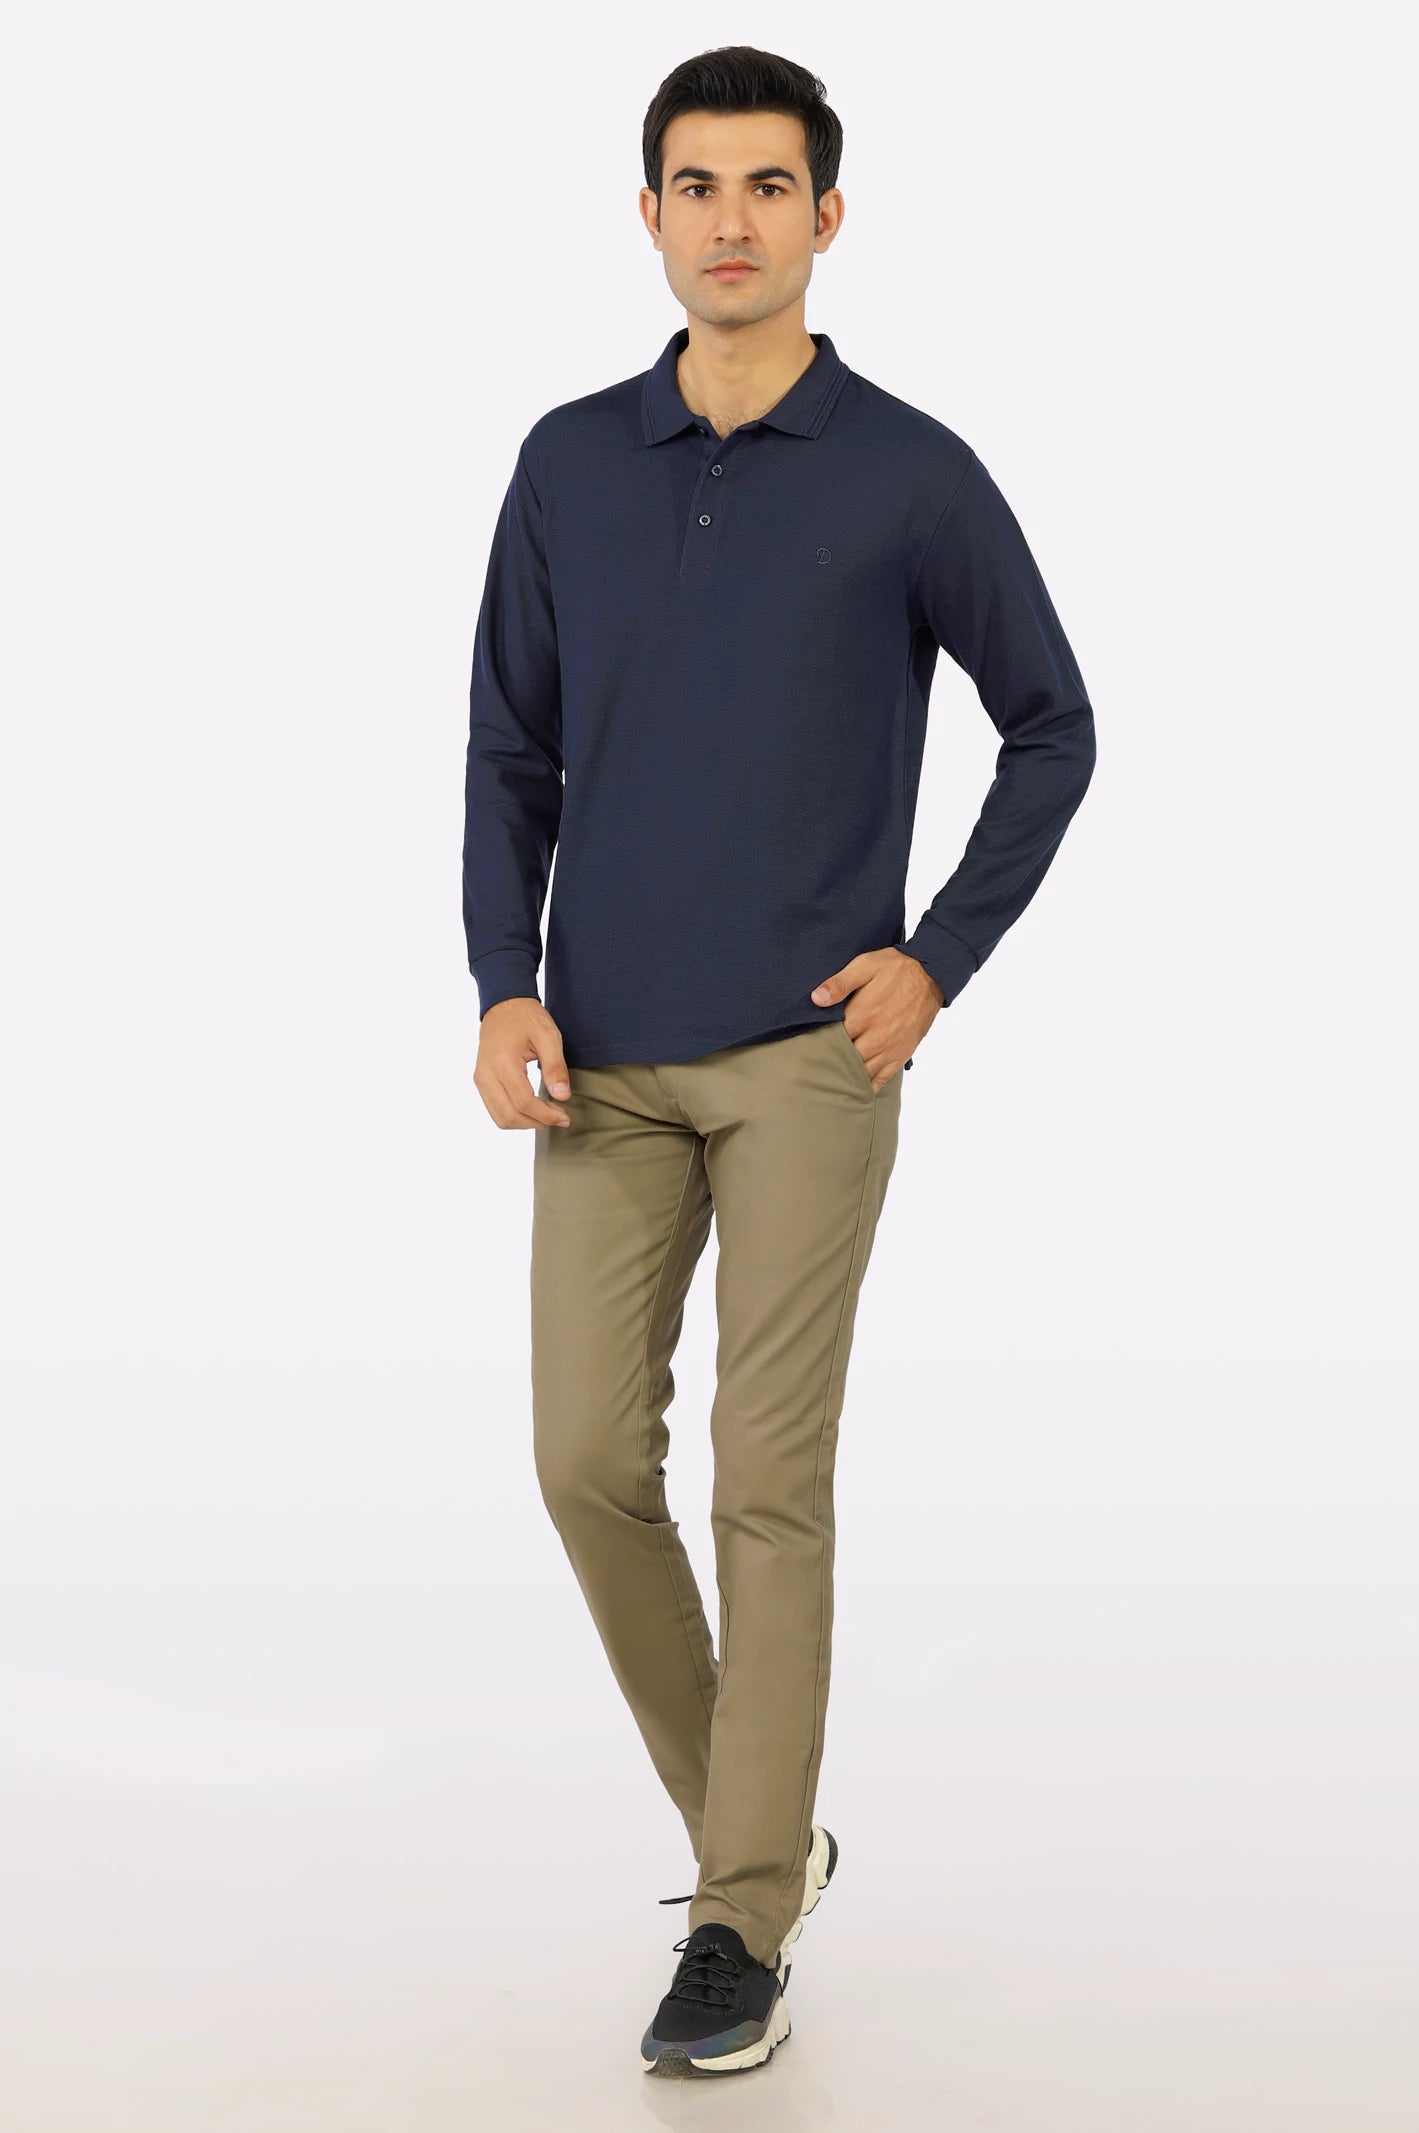 Navy Blue Long Sleeves Polo From Diners